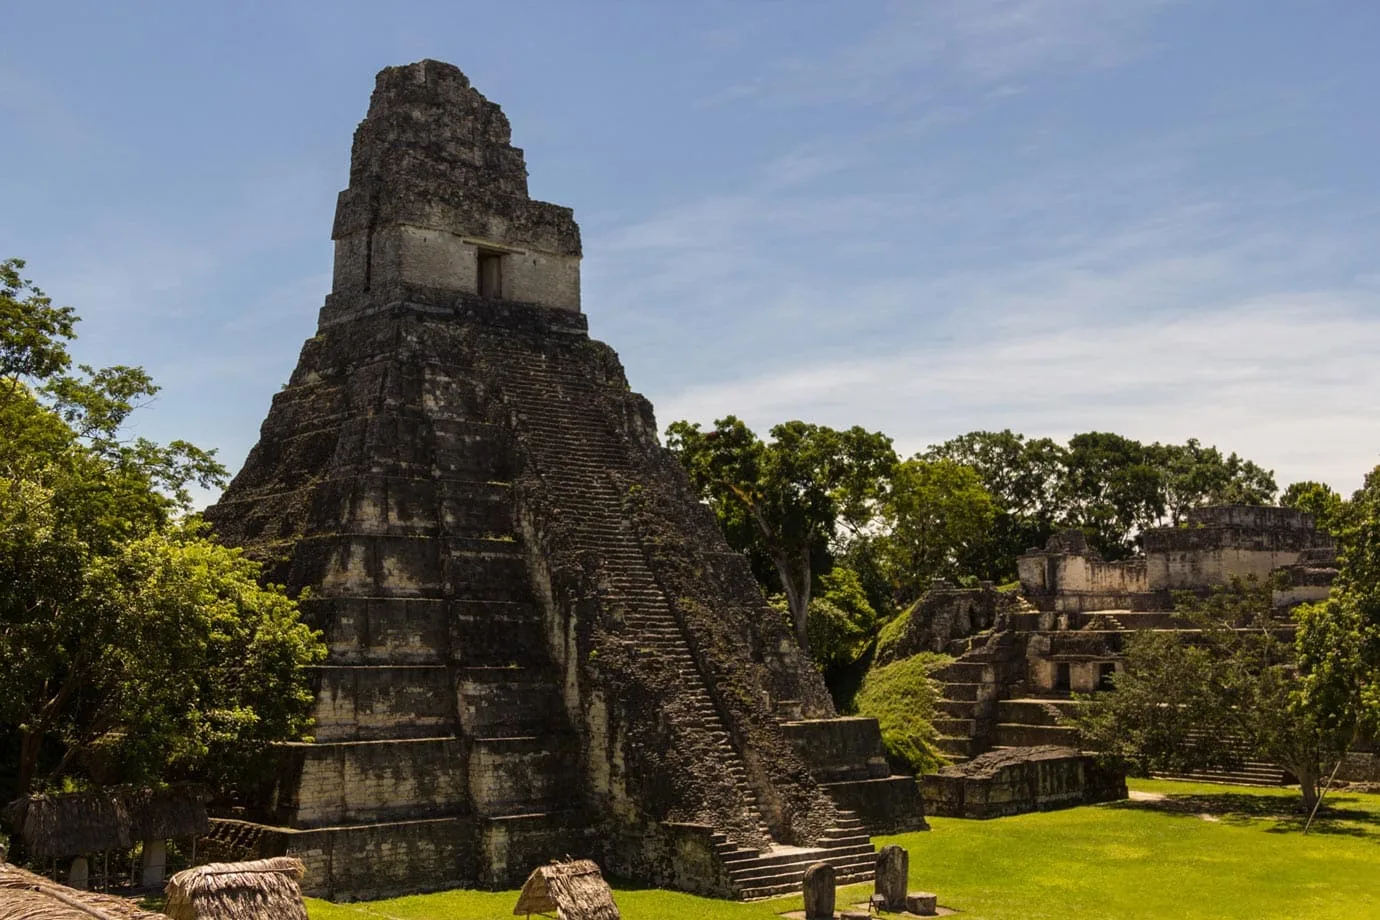 Tikal was once one of the great ancient cities in the world